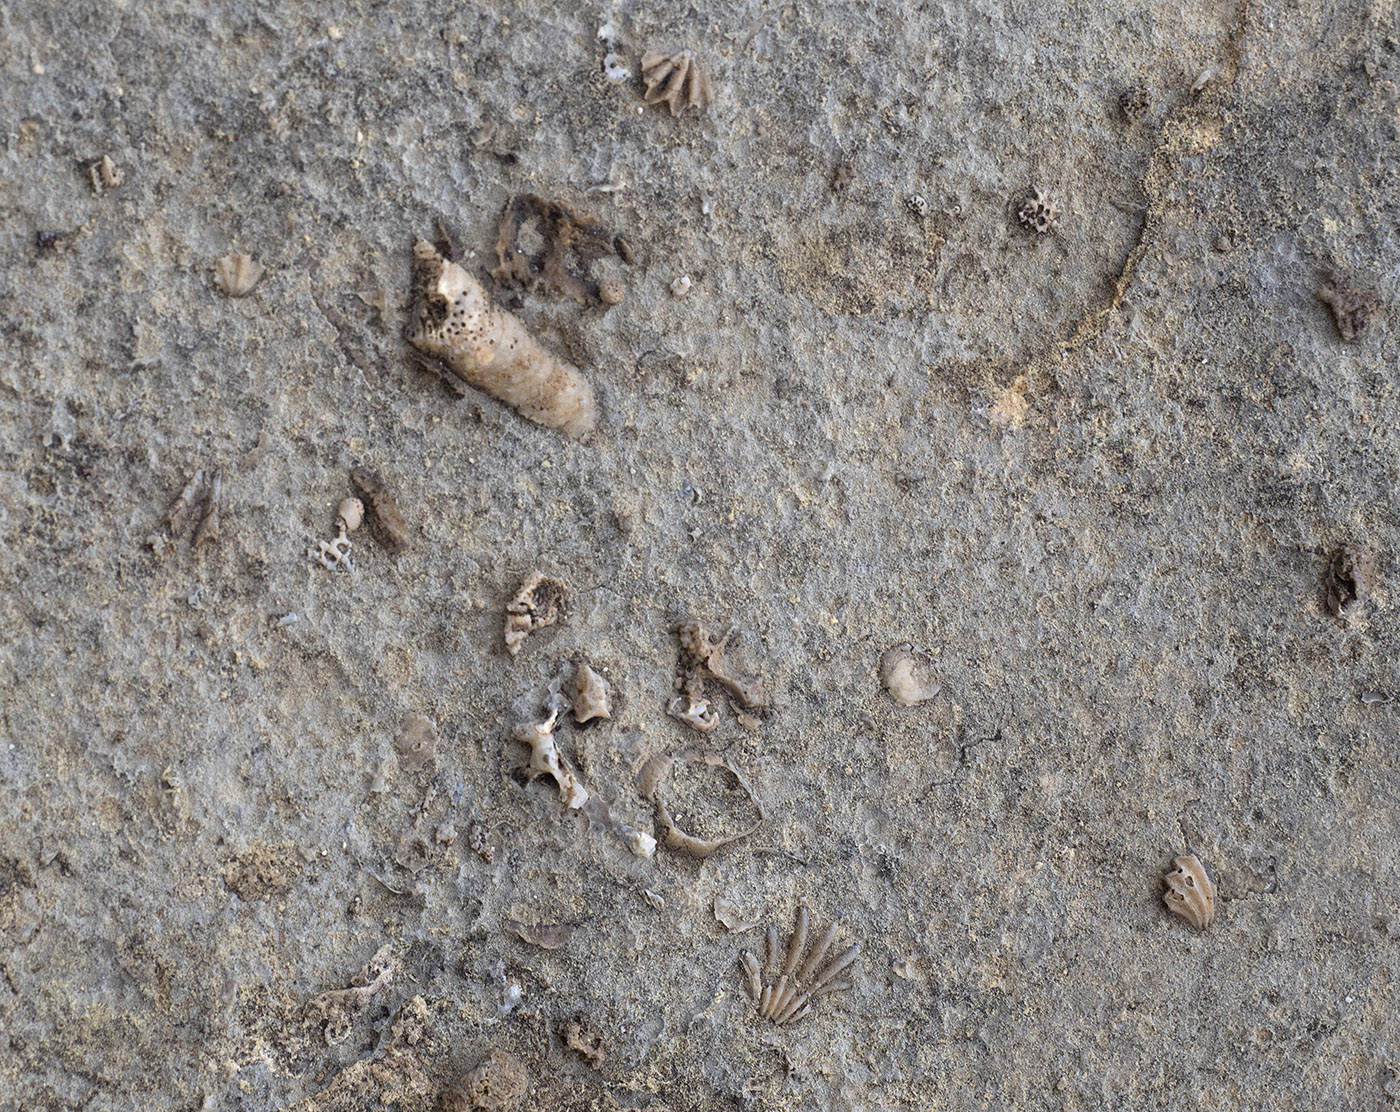 Brachiopod and coral fossils from the Permian Period Capitan Reef, McKittrick Canyon.